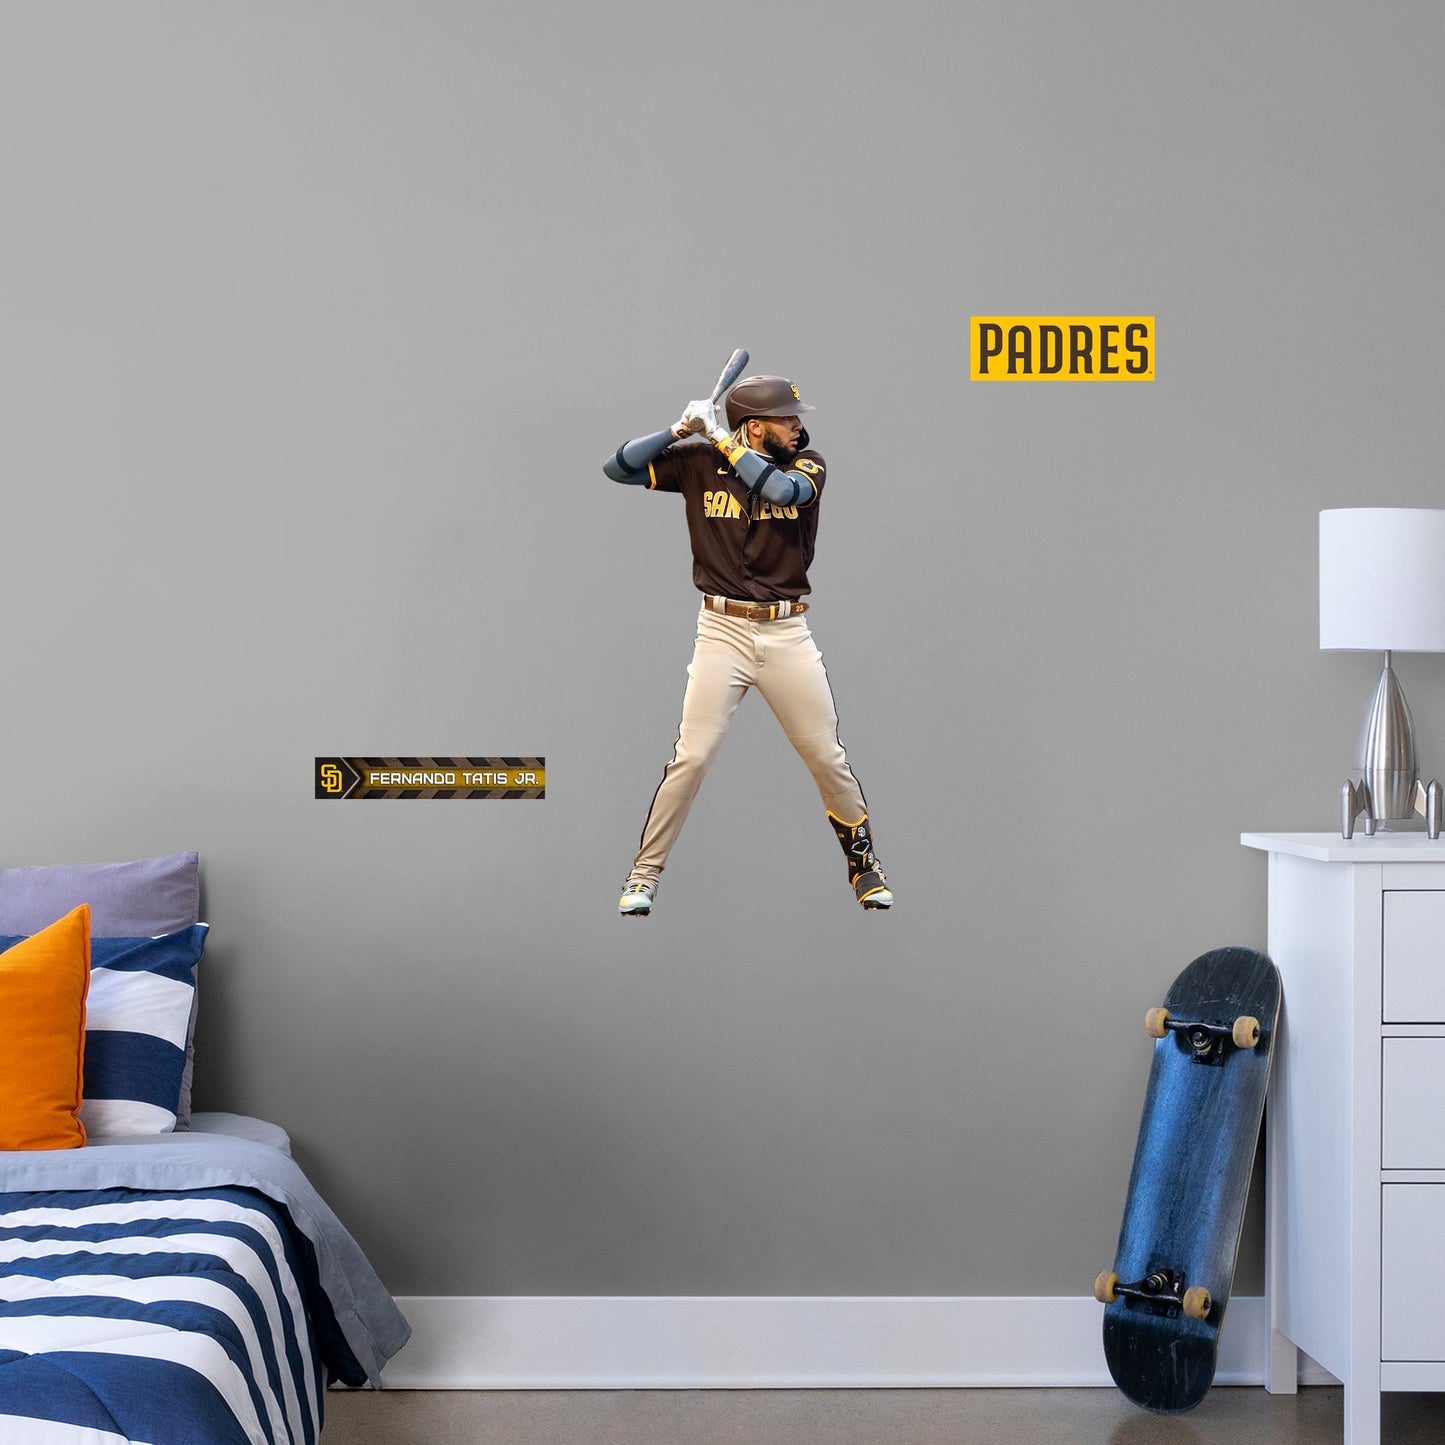 San Diego Padres: Fernando Tatis Jr. - Officially Licensed MLB Removable Wall Adhesive Decal